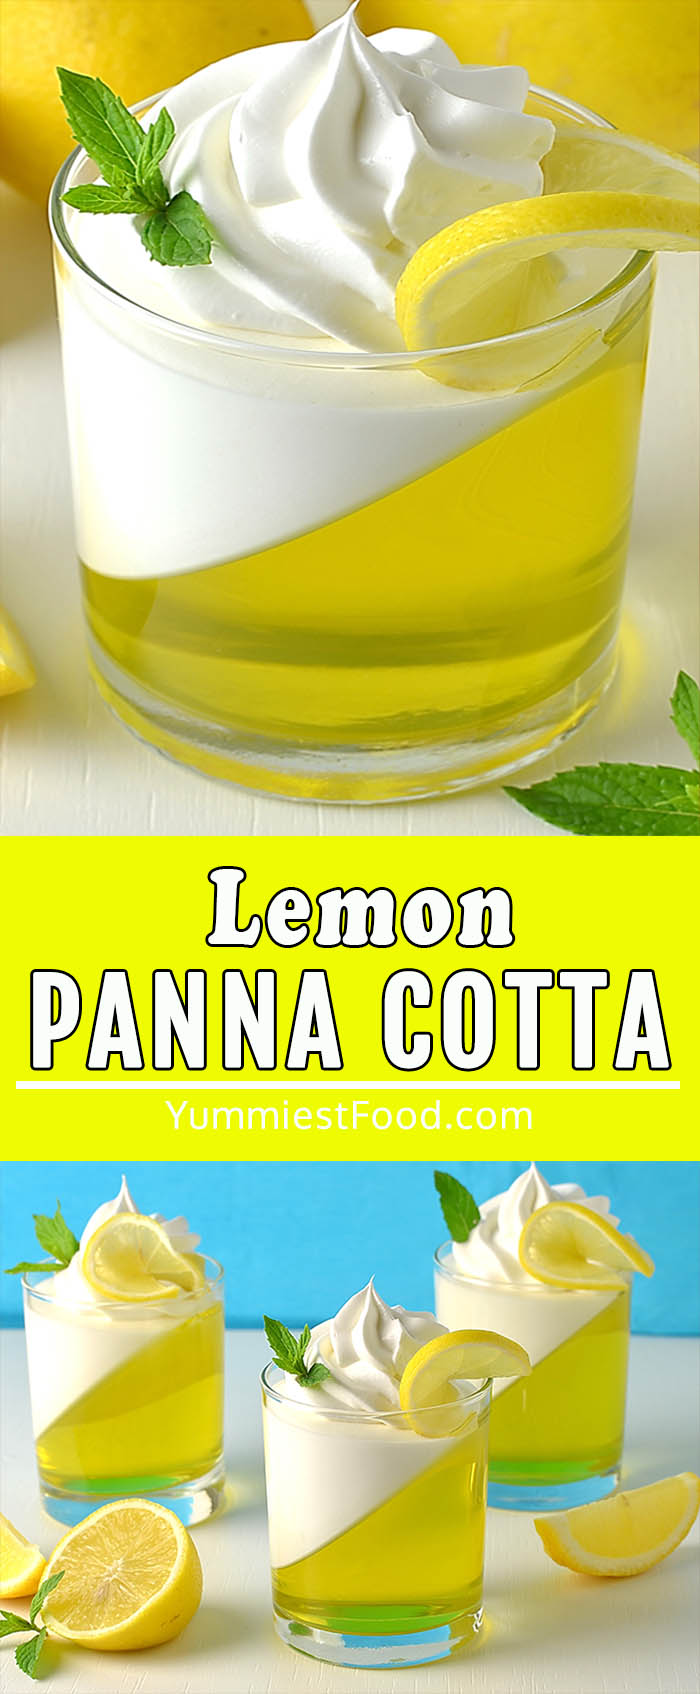  Lemon Panna Cotta is rich and creamy Layer of lemon jello on the bottom with extra creamy top layer of panna cotta! Easy to make, classic Italian dessert! It has a melt-in-your-mouth texture and it's deliciously refreshing!